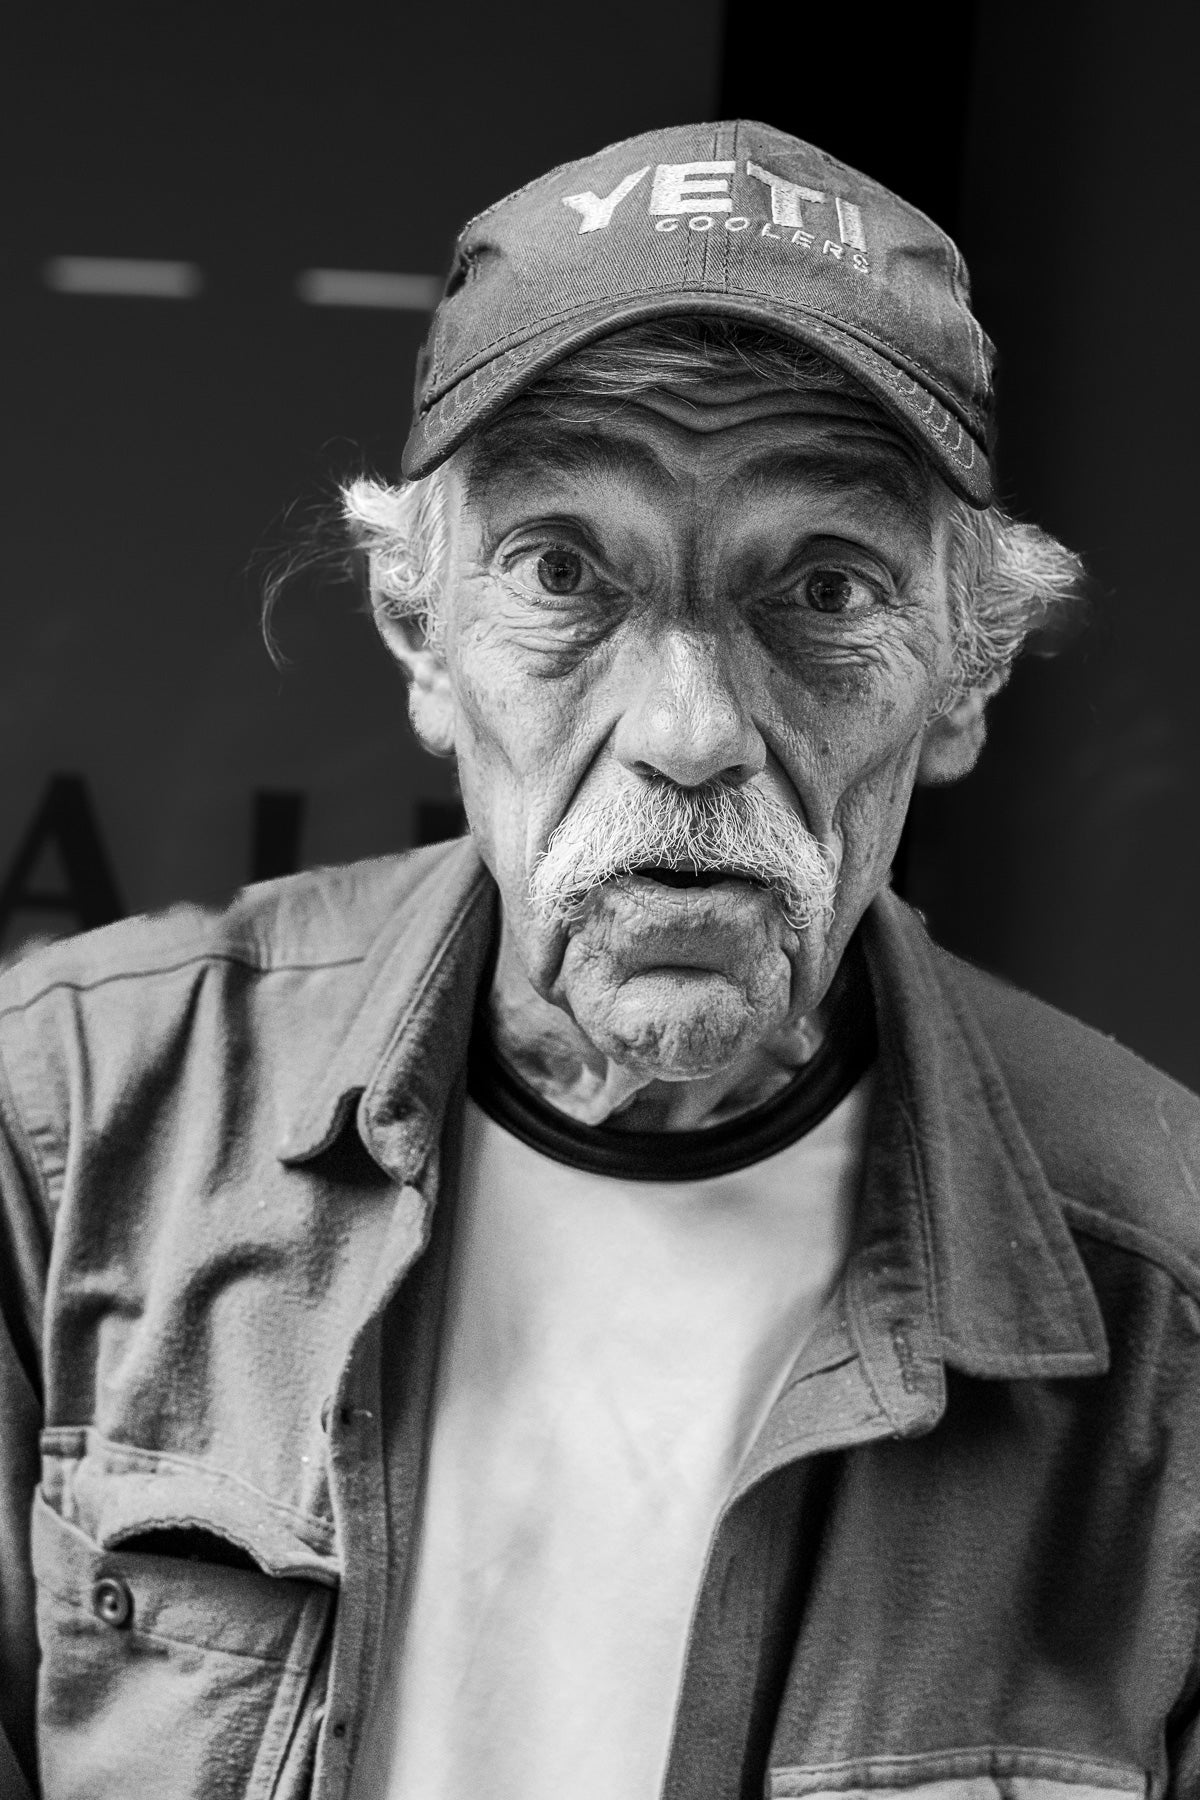 ic:In this photo of a surprised look photo of an older man in New York, I spent 15 minutes talking to him and taking various street portraits with consent.